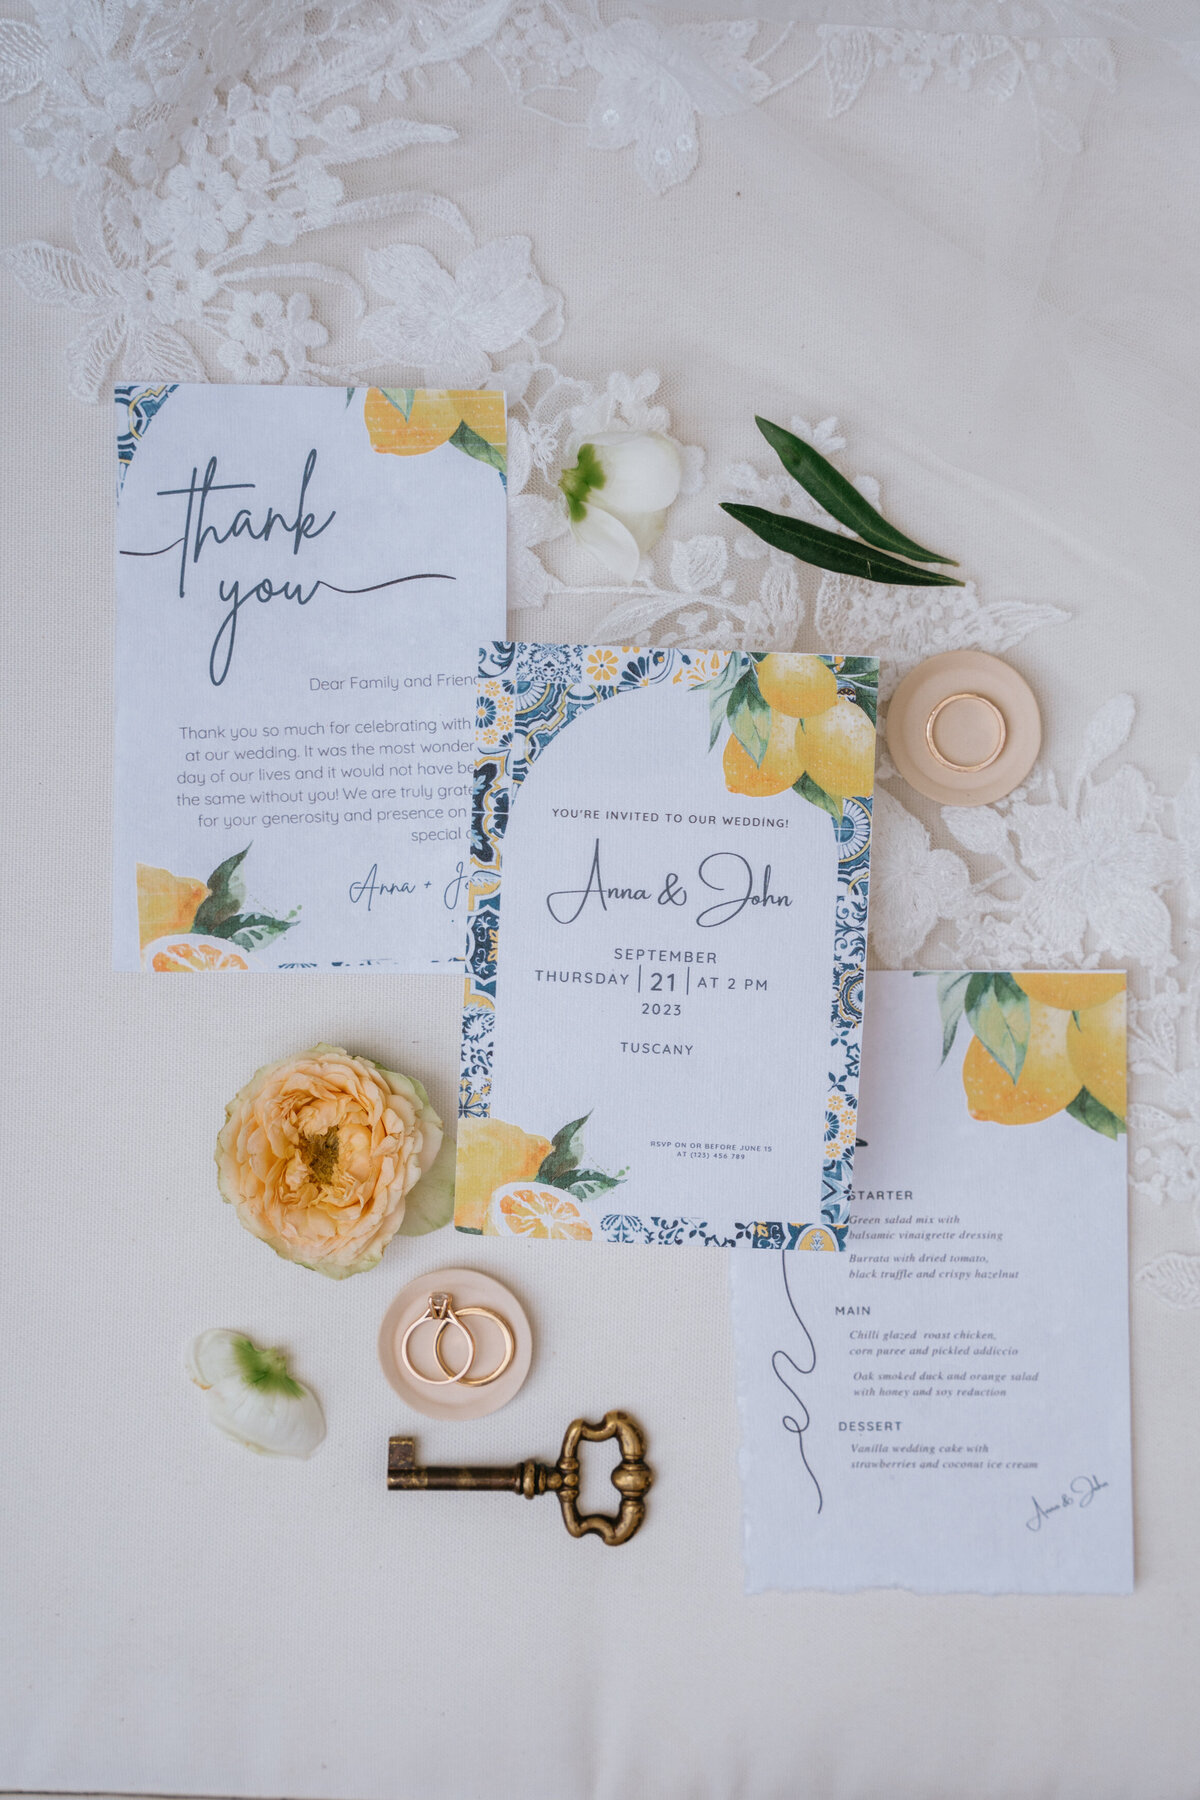 Wedding stationary in Tuscany such as invitations and thank you cards